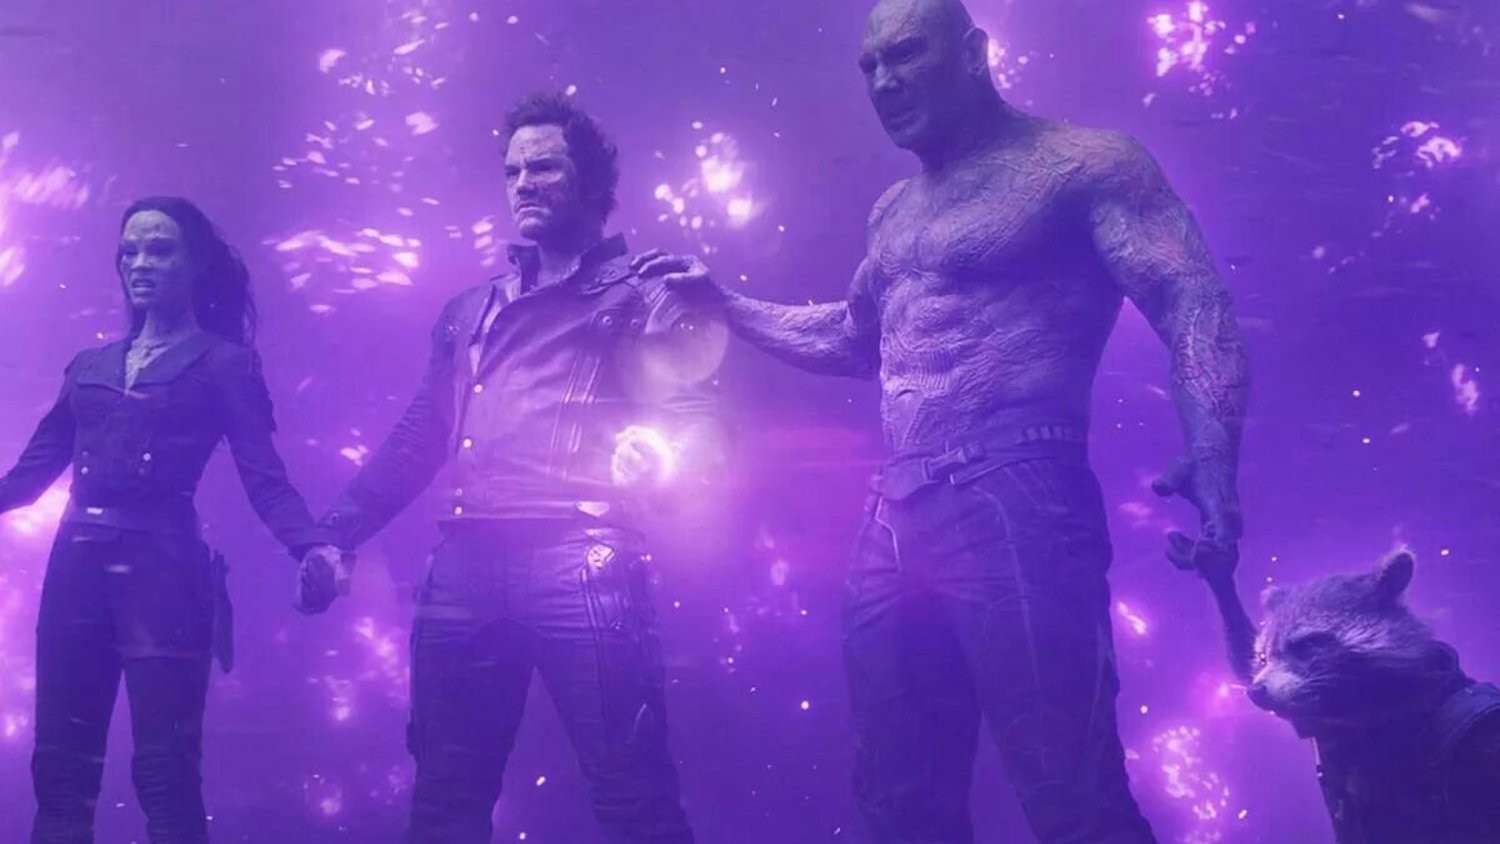 Rocket joins the chain at the end of Guardians of the Galaxy (2014)